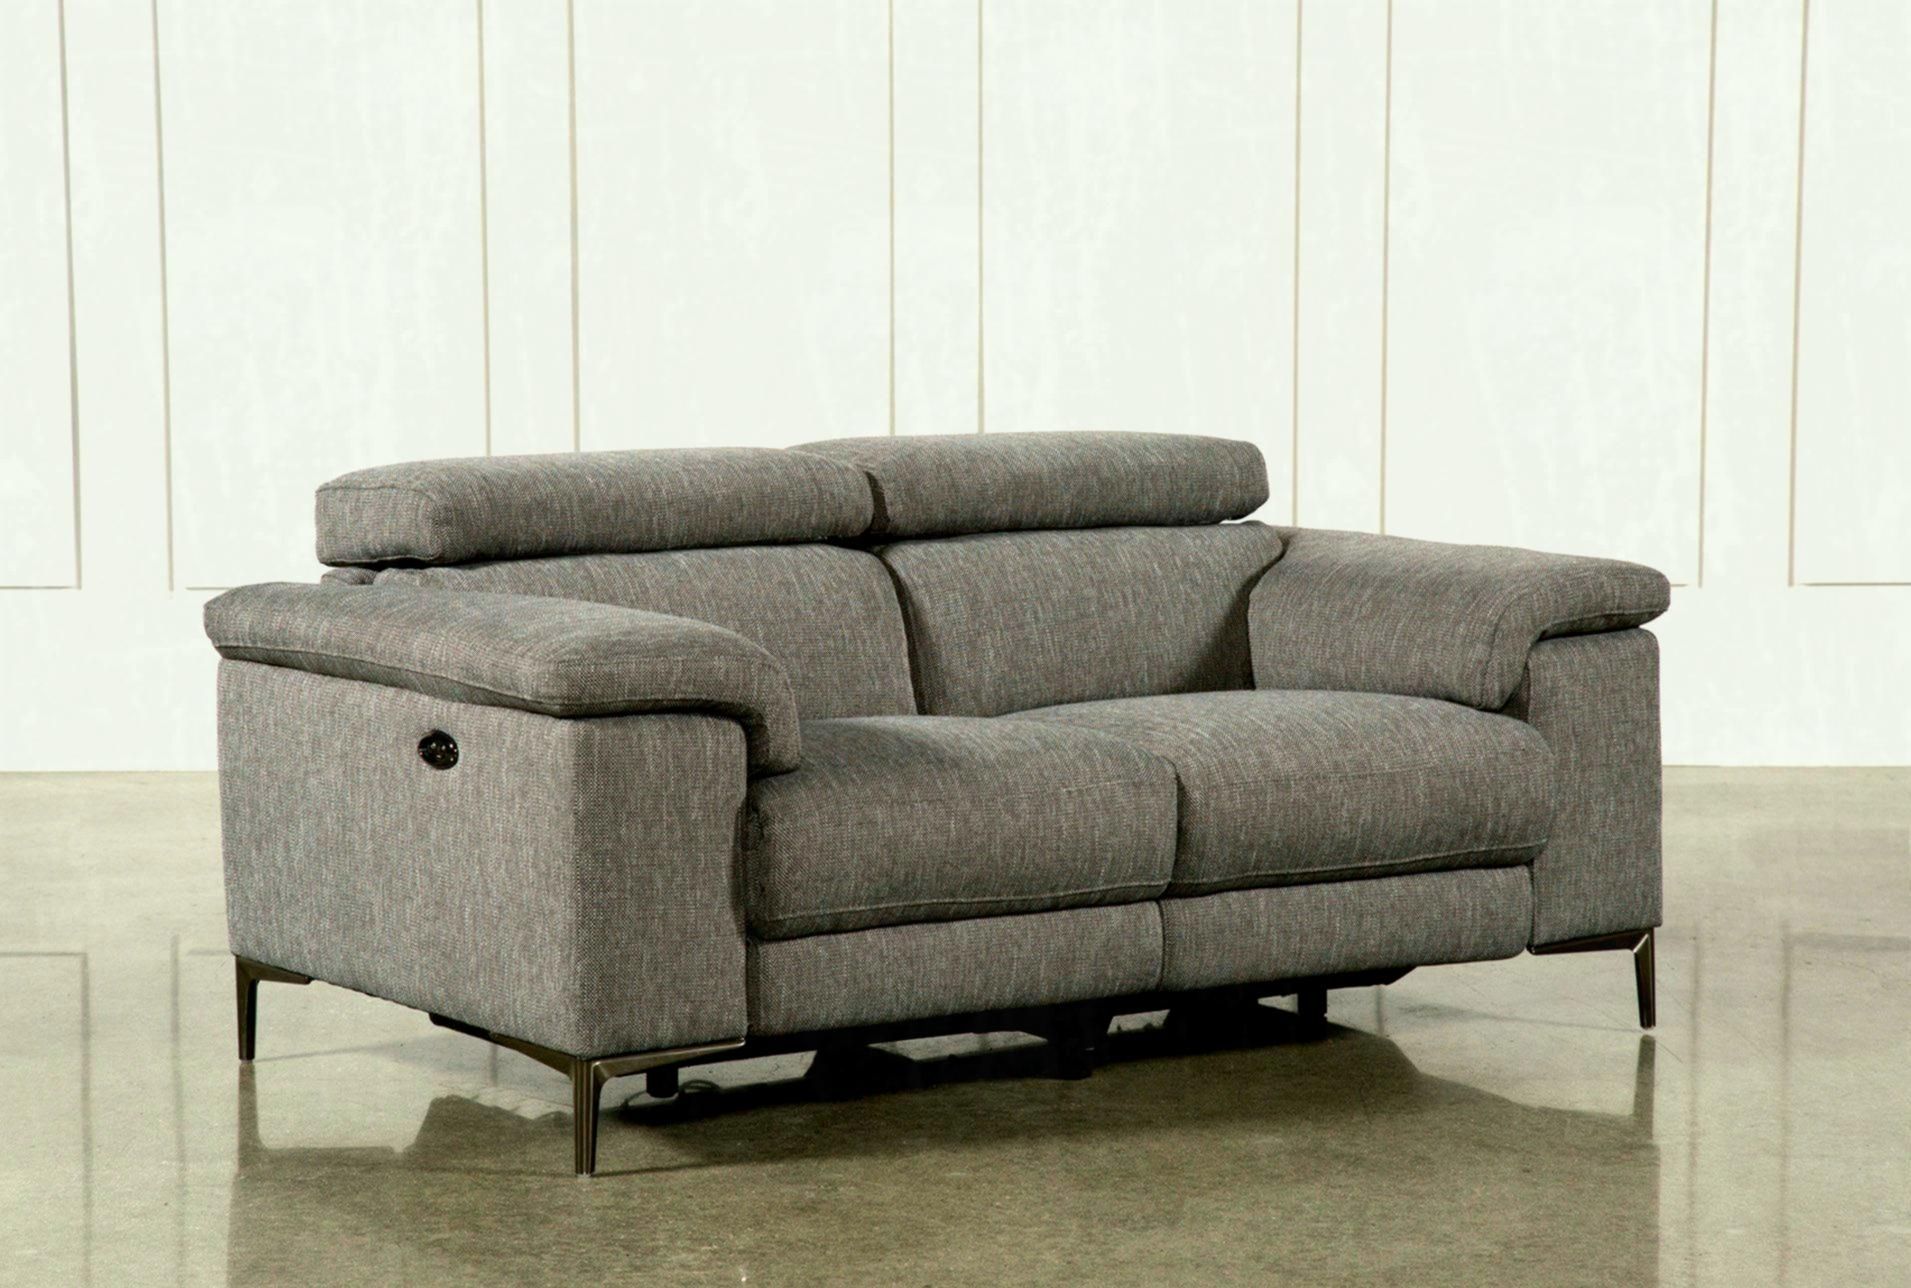 Added To Cart Delano Piece Sectional W Laf Oversized Chaise Living For Delano 2 Piece Sectionals With Laf Oversized Chaise (View 16 of 30)